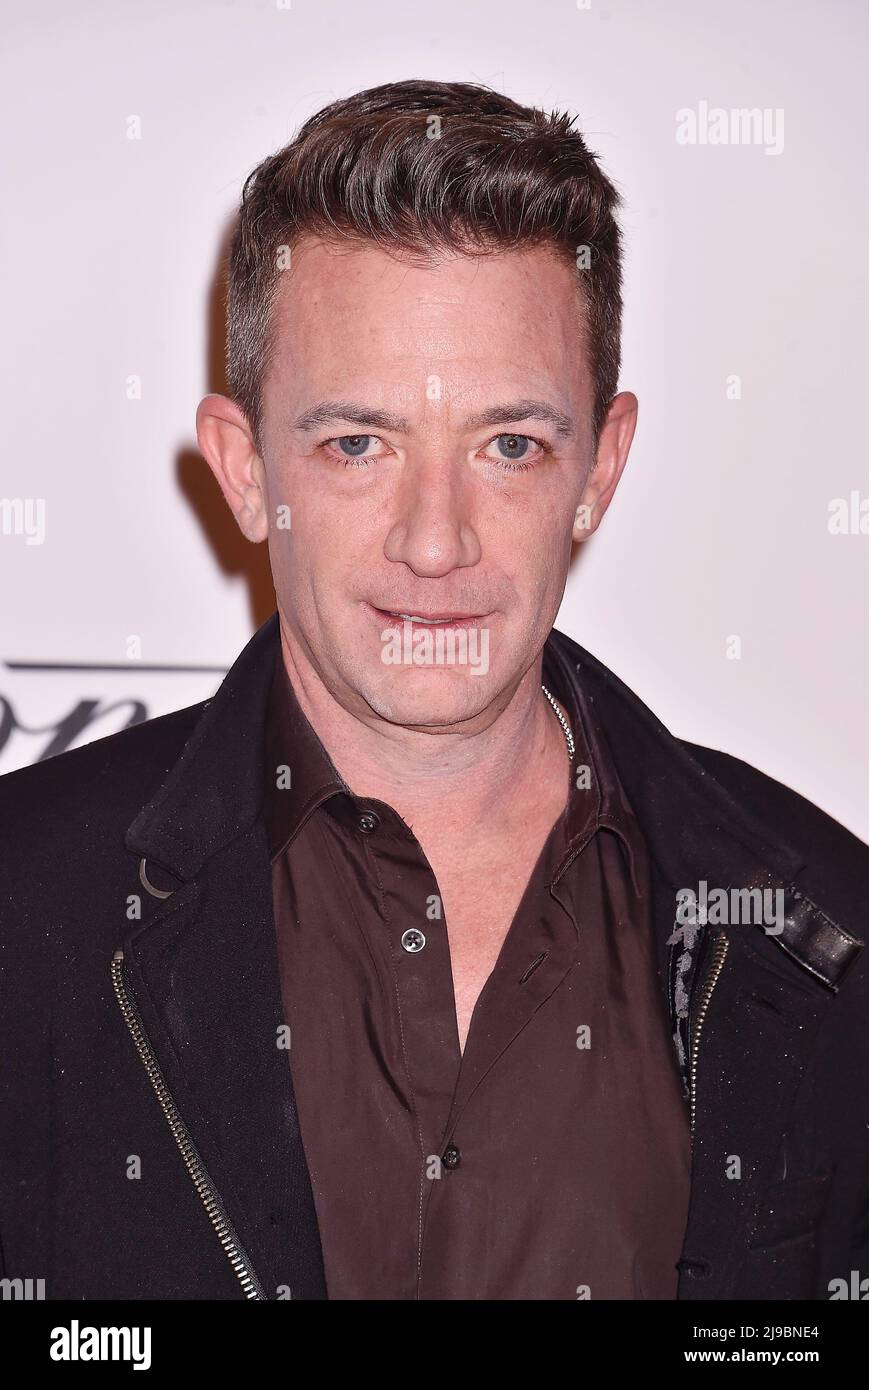 LOS ANGELES, CA - MAY 20: David Faustino attends the 29th Annual Race To Erase MS Gala at the Fairmont Century Plaza Hotel on May 20, 2022 in Los Angeles, California. Credit: Jeffrey Mayer/JTM Photos/MediaPunch Stock Photo